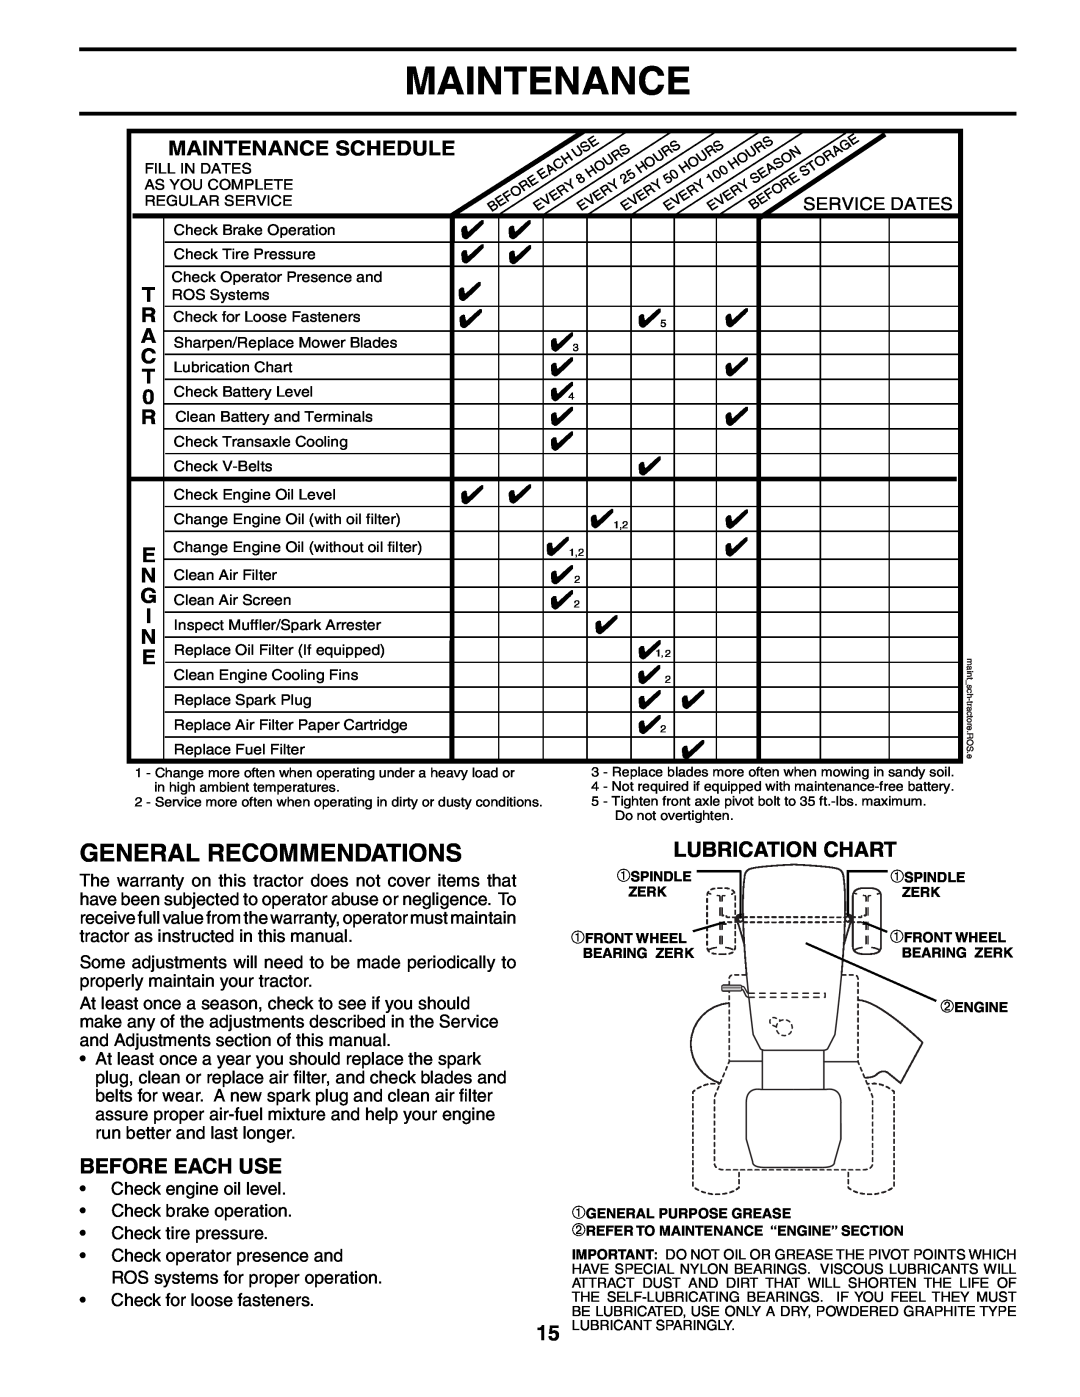 Poulan HDK19H42 manual General Recommendations, Lubrication Chart, Before Each Use, Maintenance Schedule 